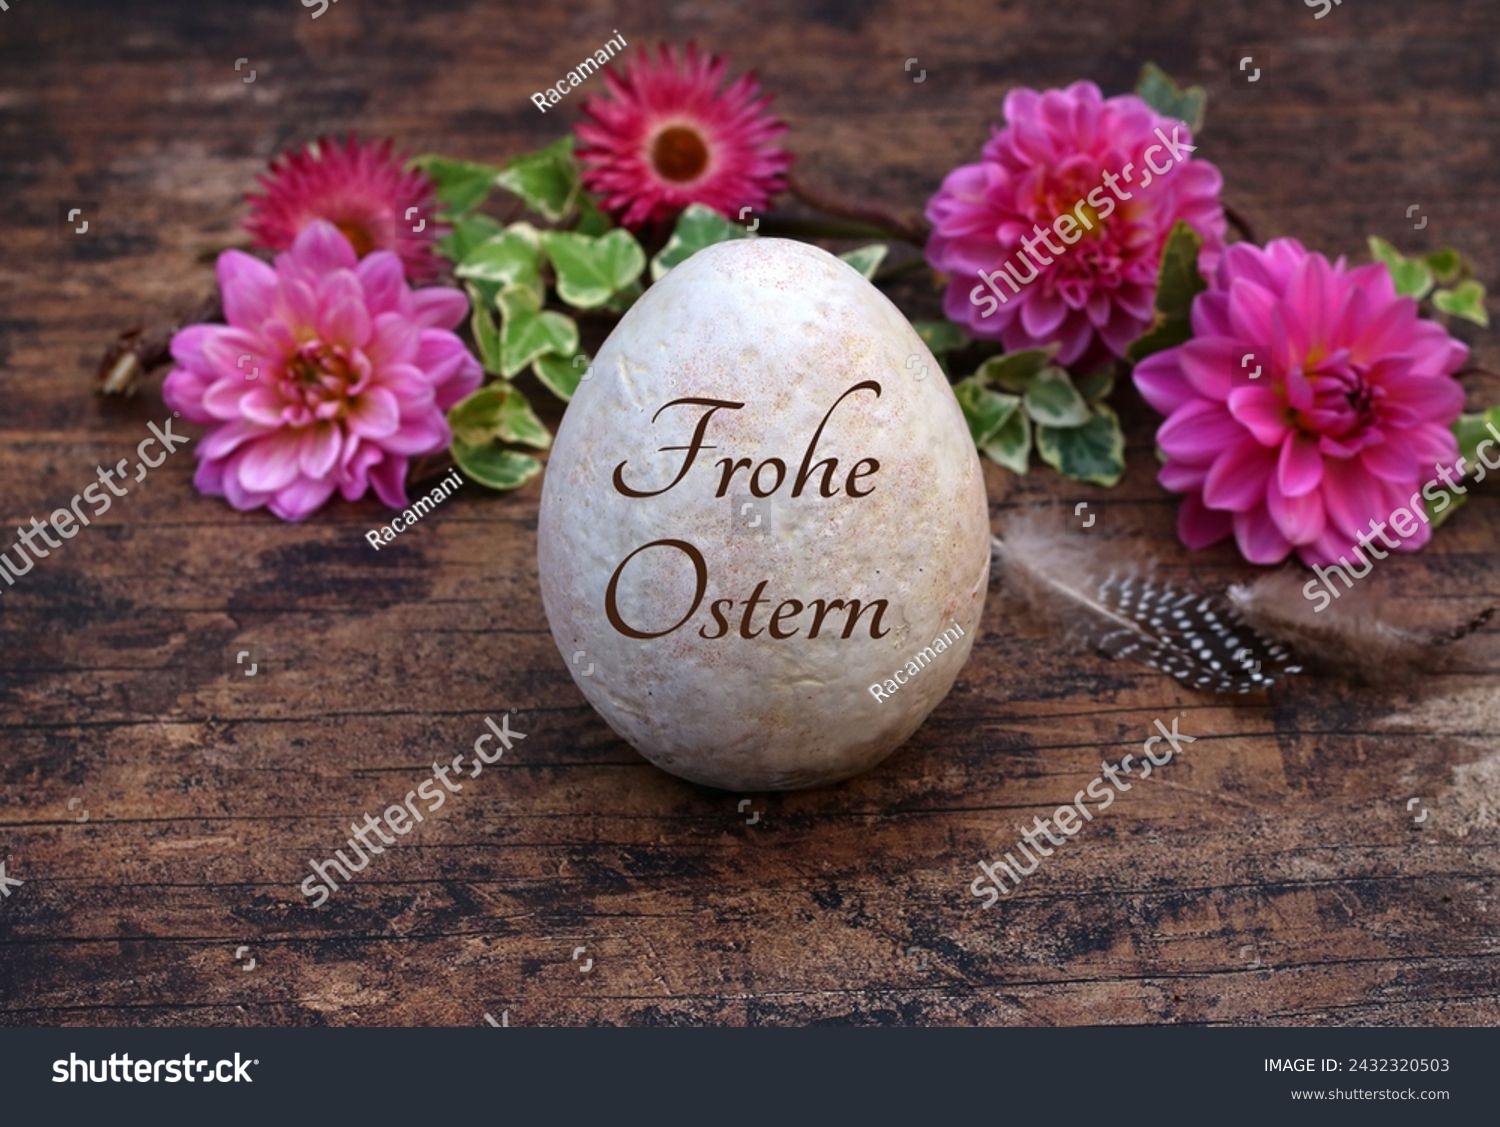 Happy Easter: Inscribed Easter egg with flowers and chicken feathers on wooden background. German inscription translated means Happy Easter. #2432320503